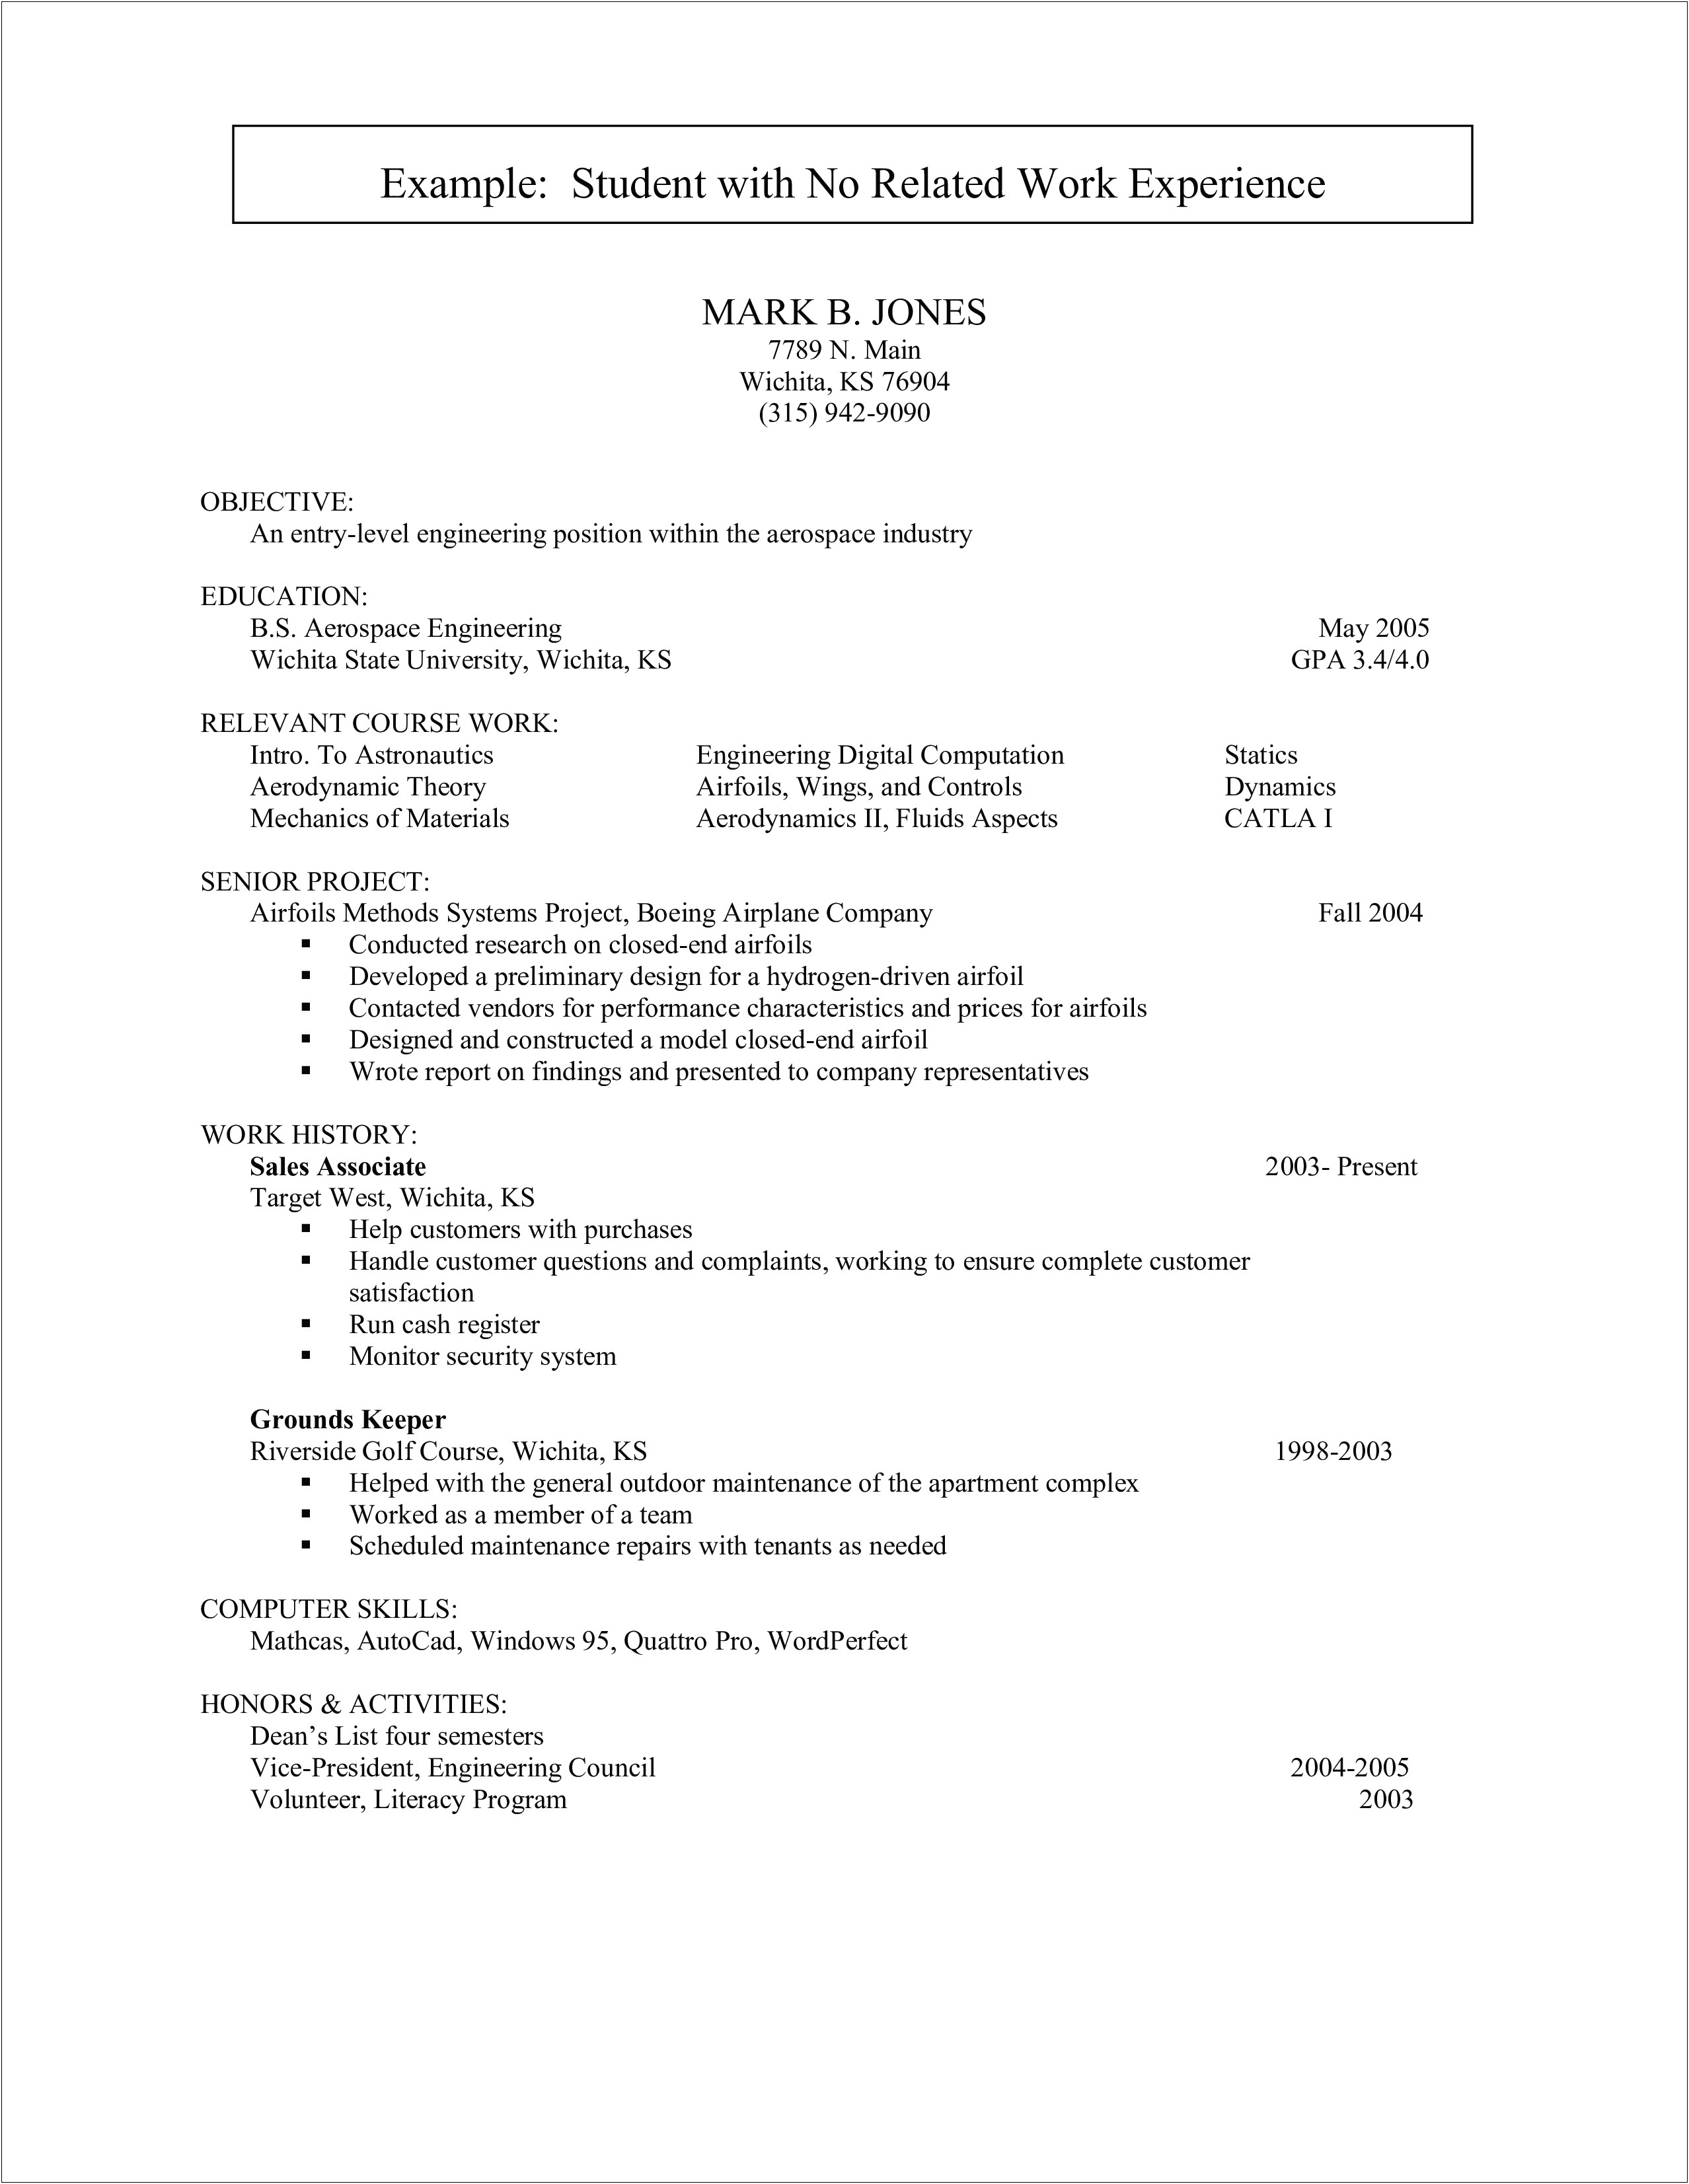 Basic Resume Objective For Any Jobs